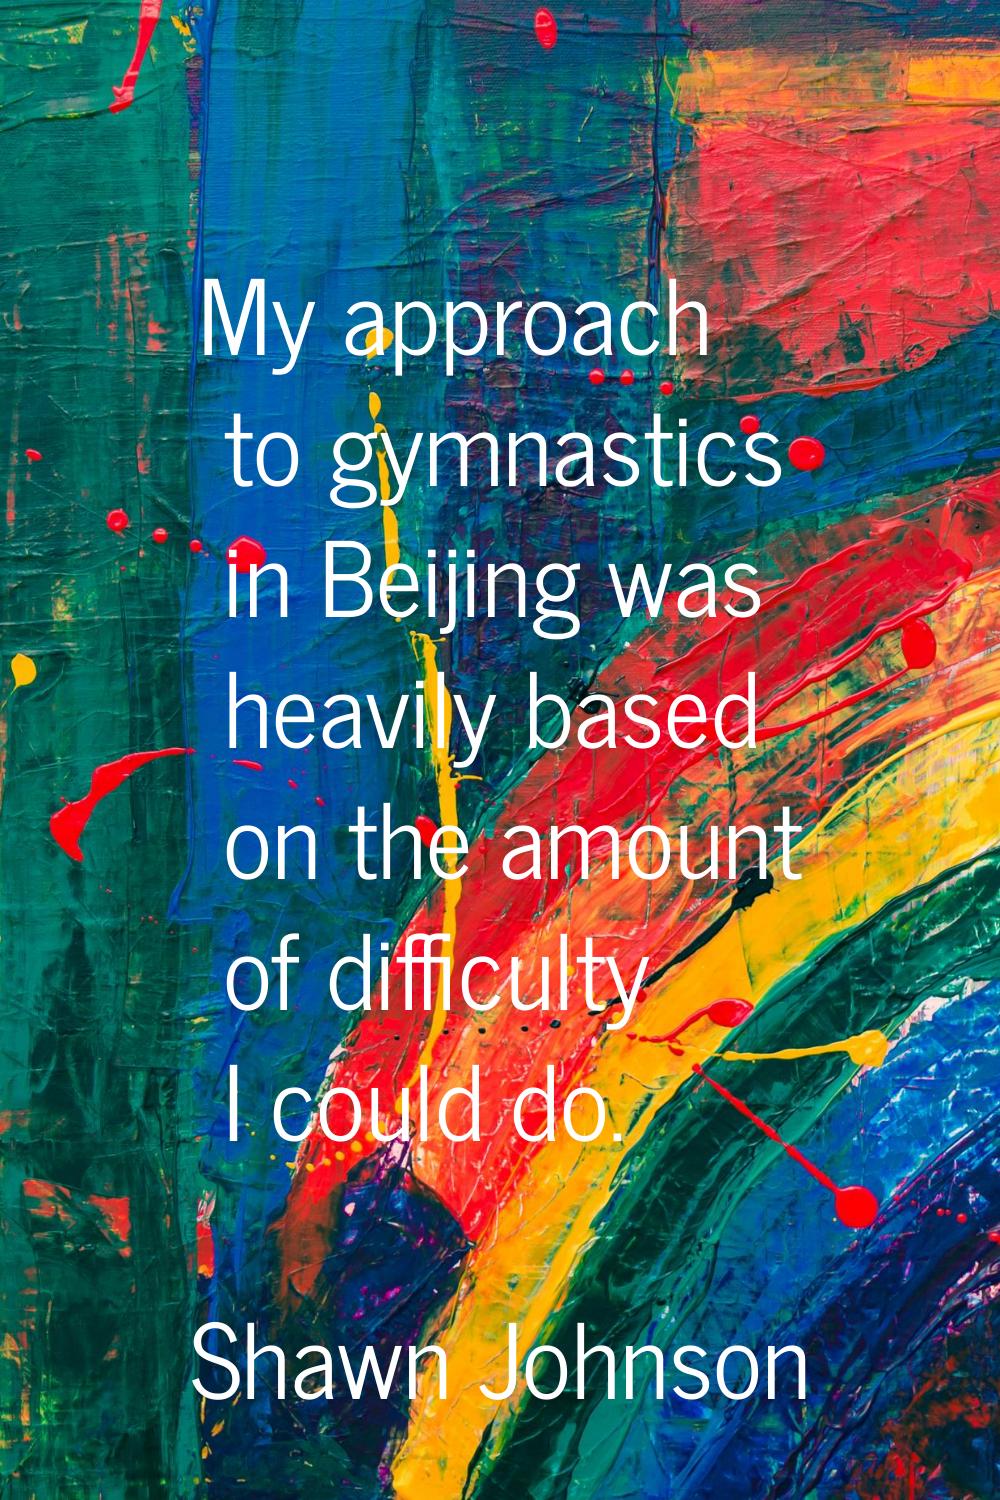 My approach to gymnastics in Beijing was heavily based on the amount of difficulty I could do.